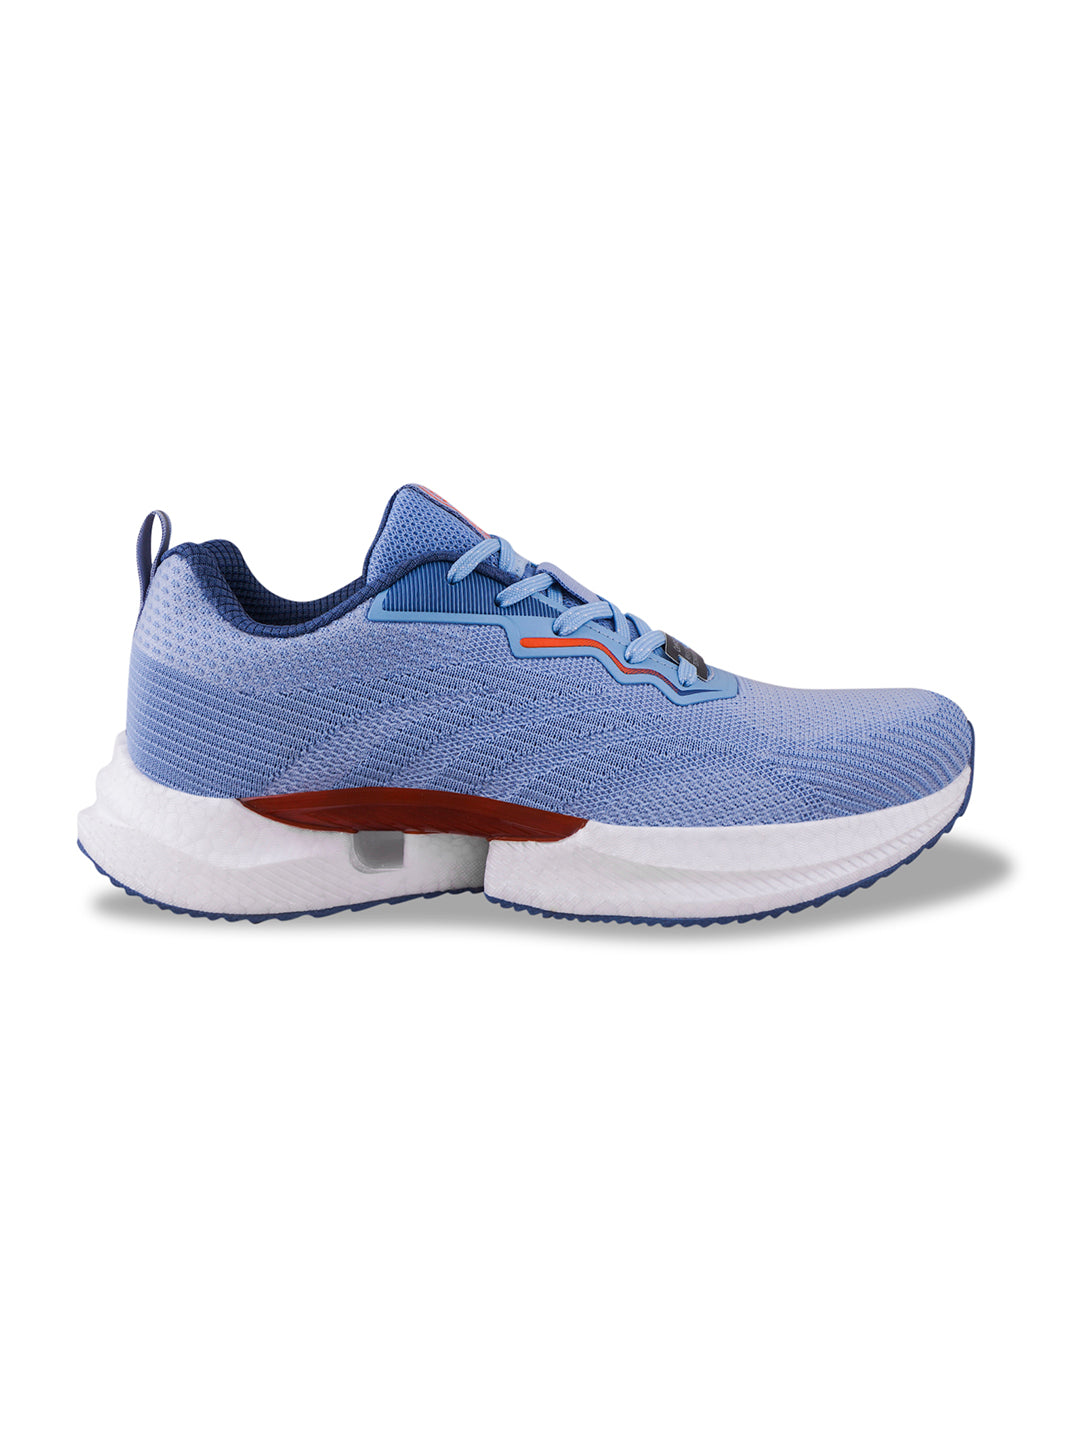 Campus Men's Shawn Running Shoes